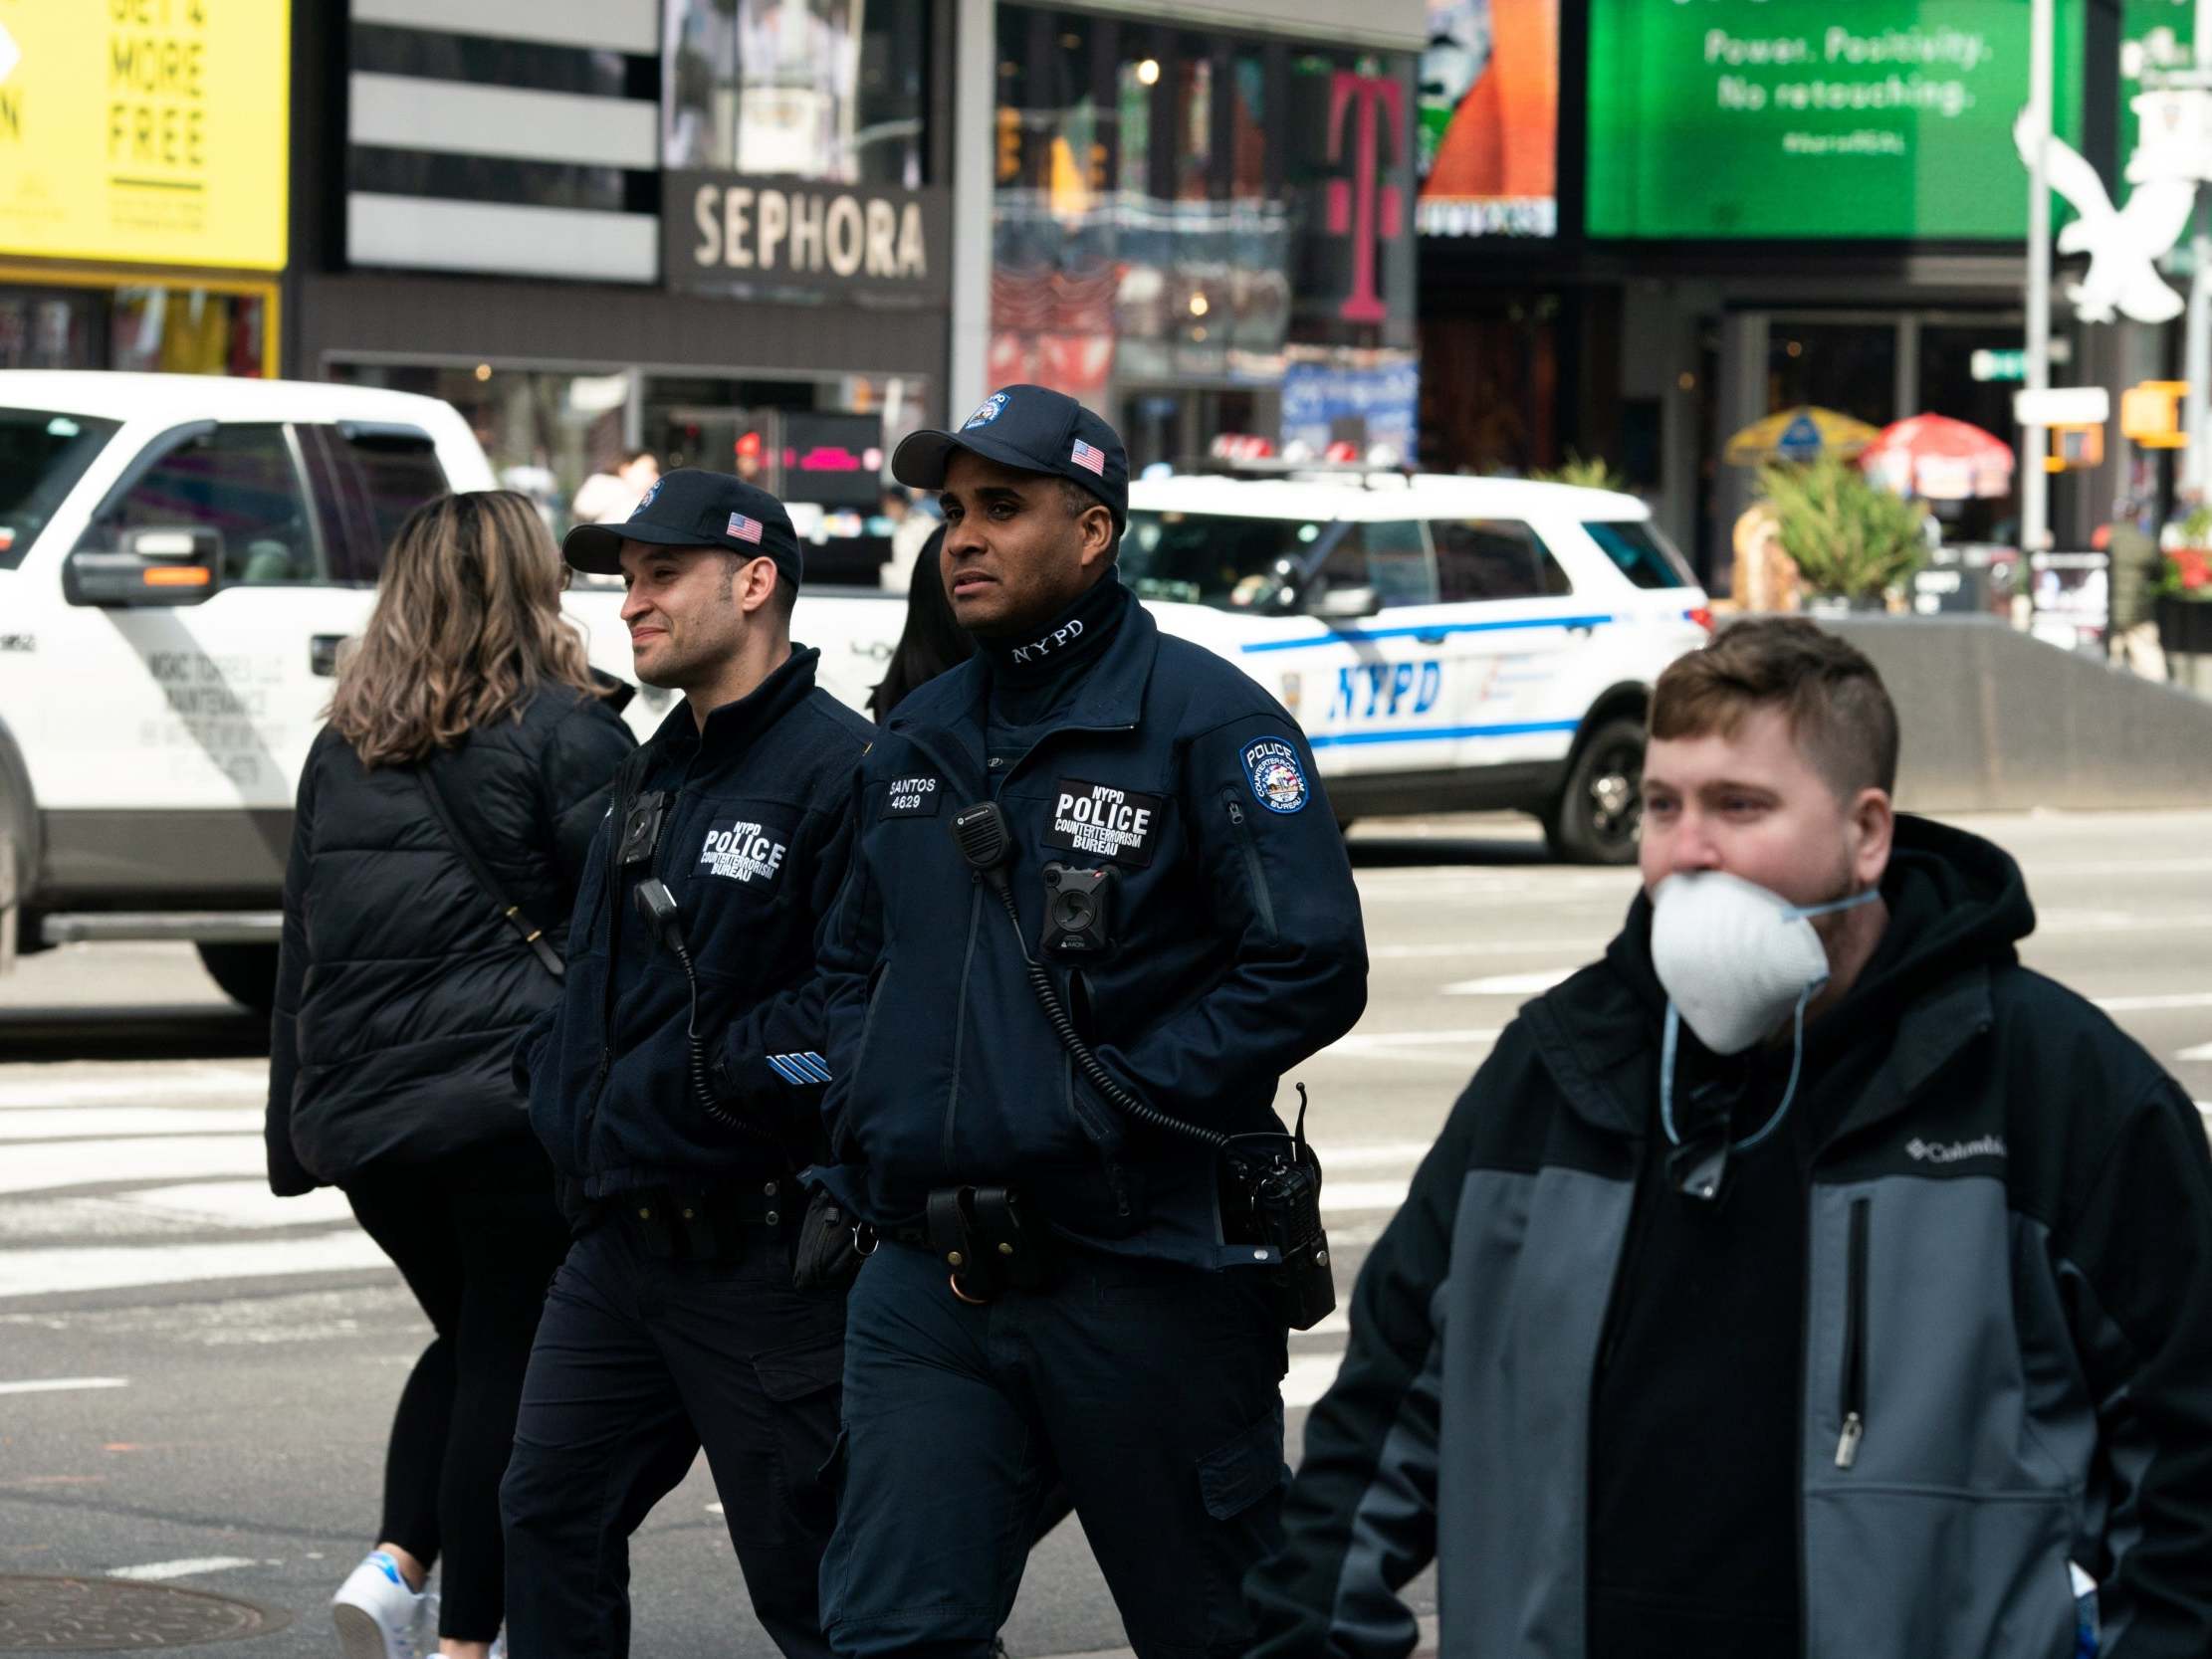 NYPD officers say they have inadequate protection amid the coronavirus pandemic